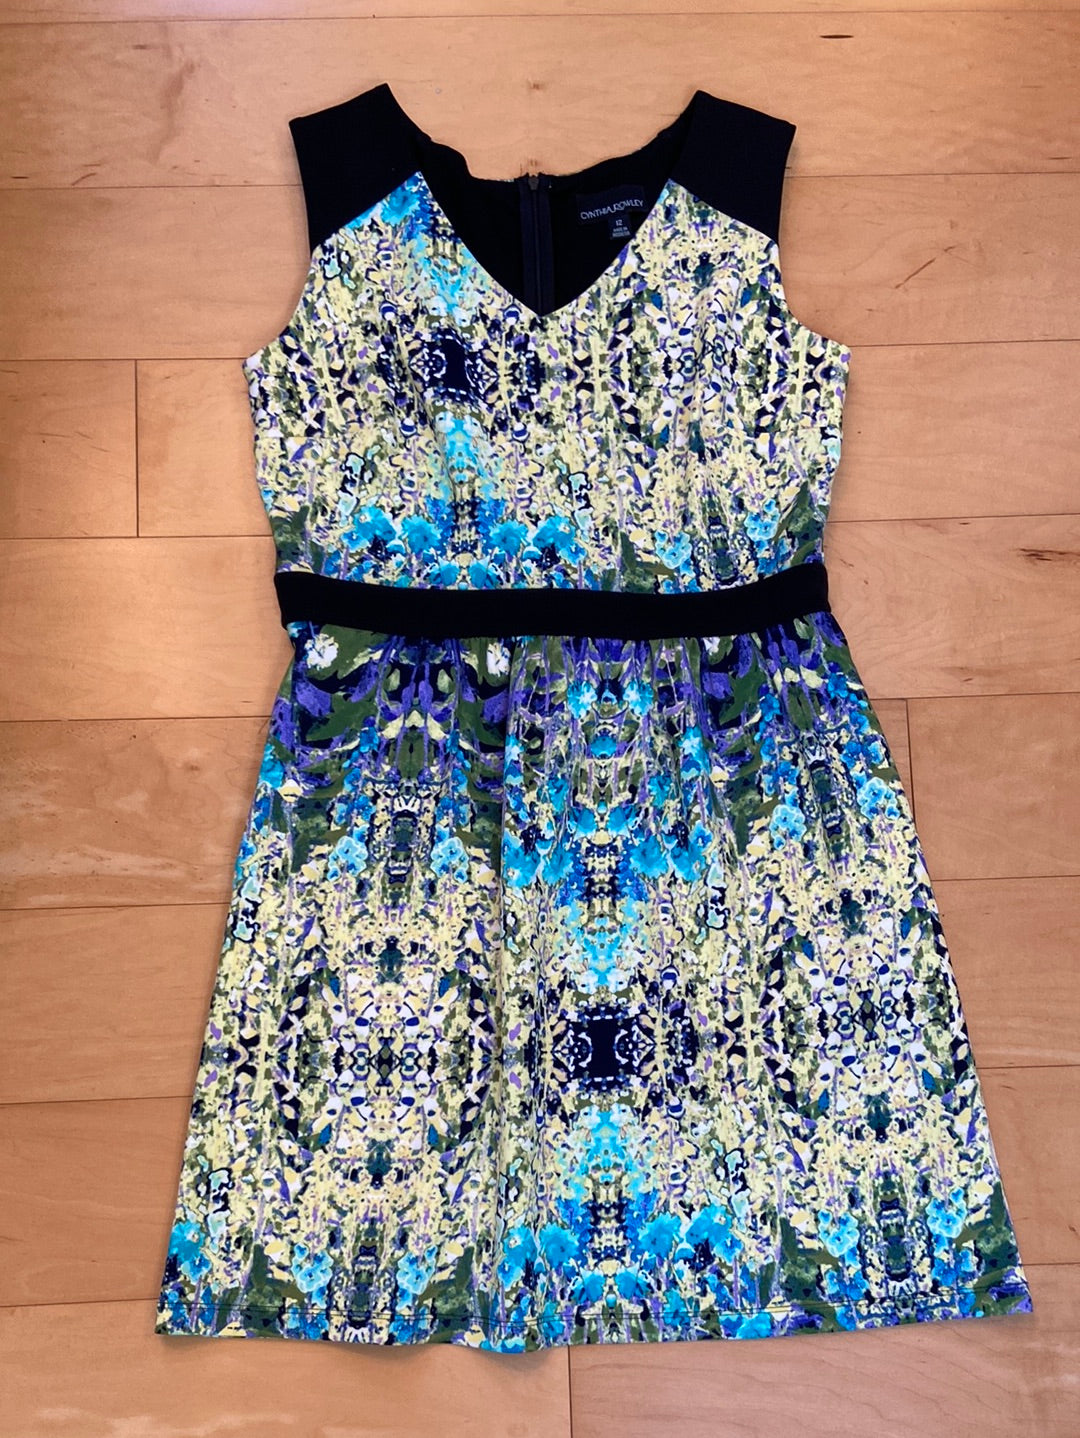 ABSTRACT FLORAL Cynthia Rowley Dress Size 12